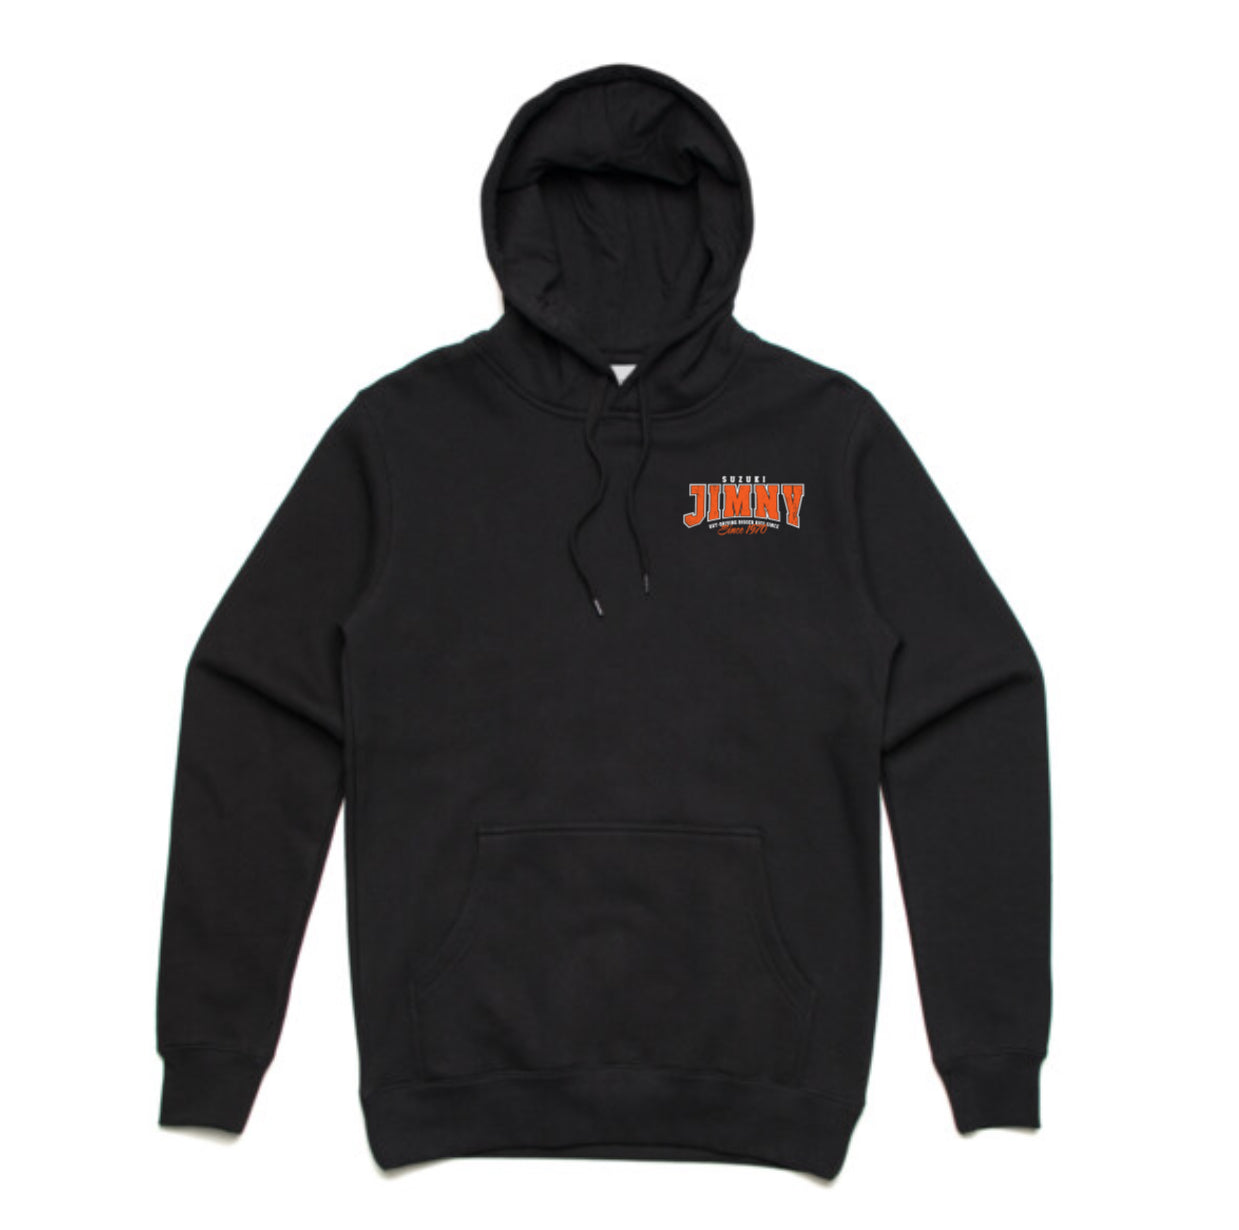 Outdriving Bigger Rigs hoodie